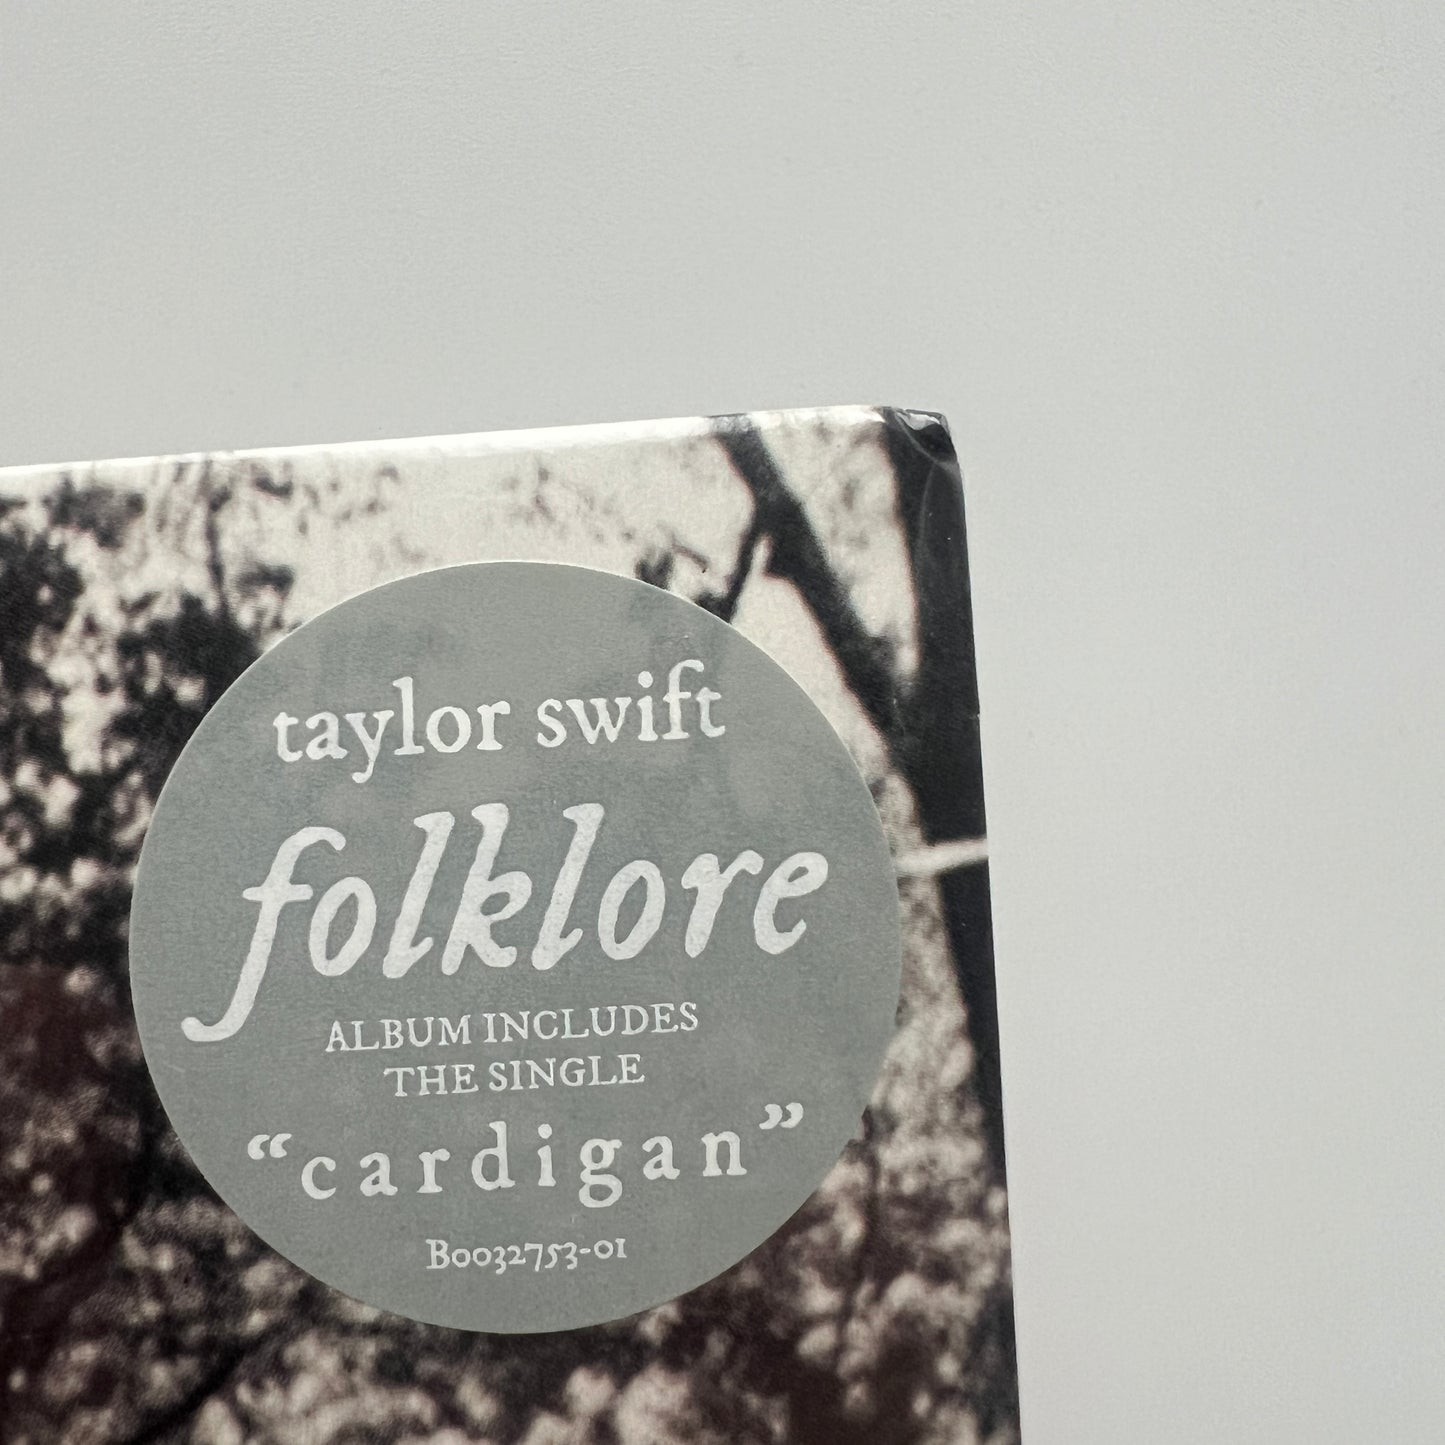 Taylor Swift - Folklore Vinyl LP Teal "In The Weeds" SEALED